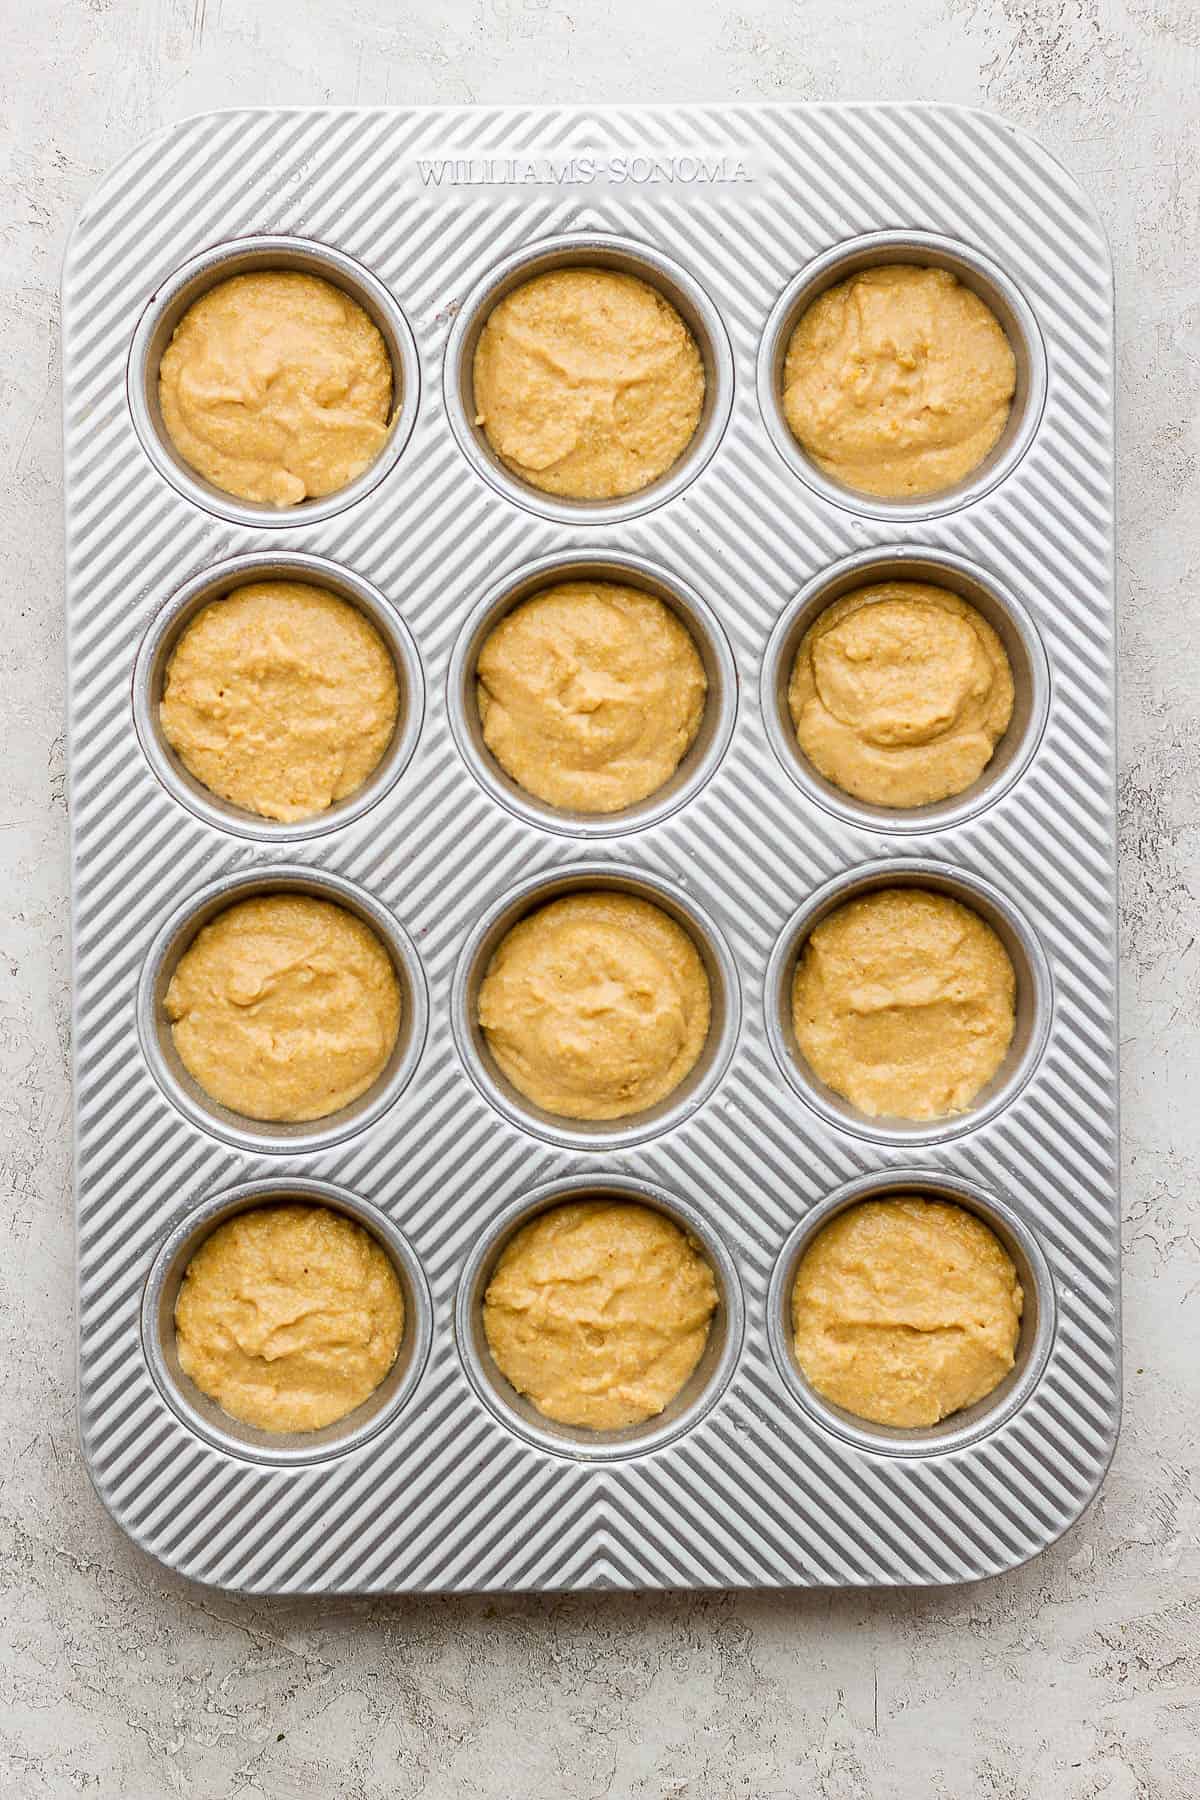 The cornbread batter in a muffin tin before baking.